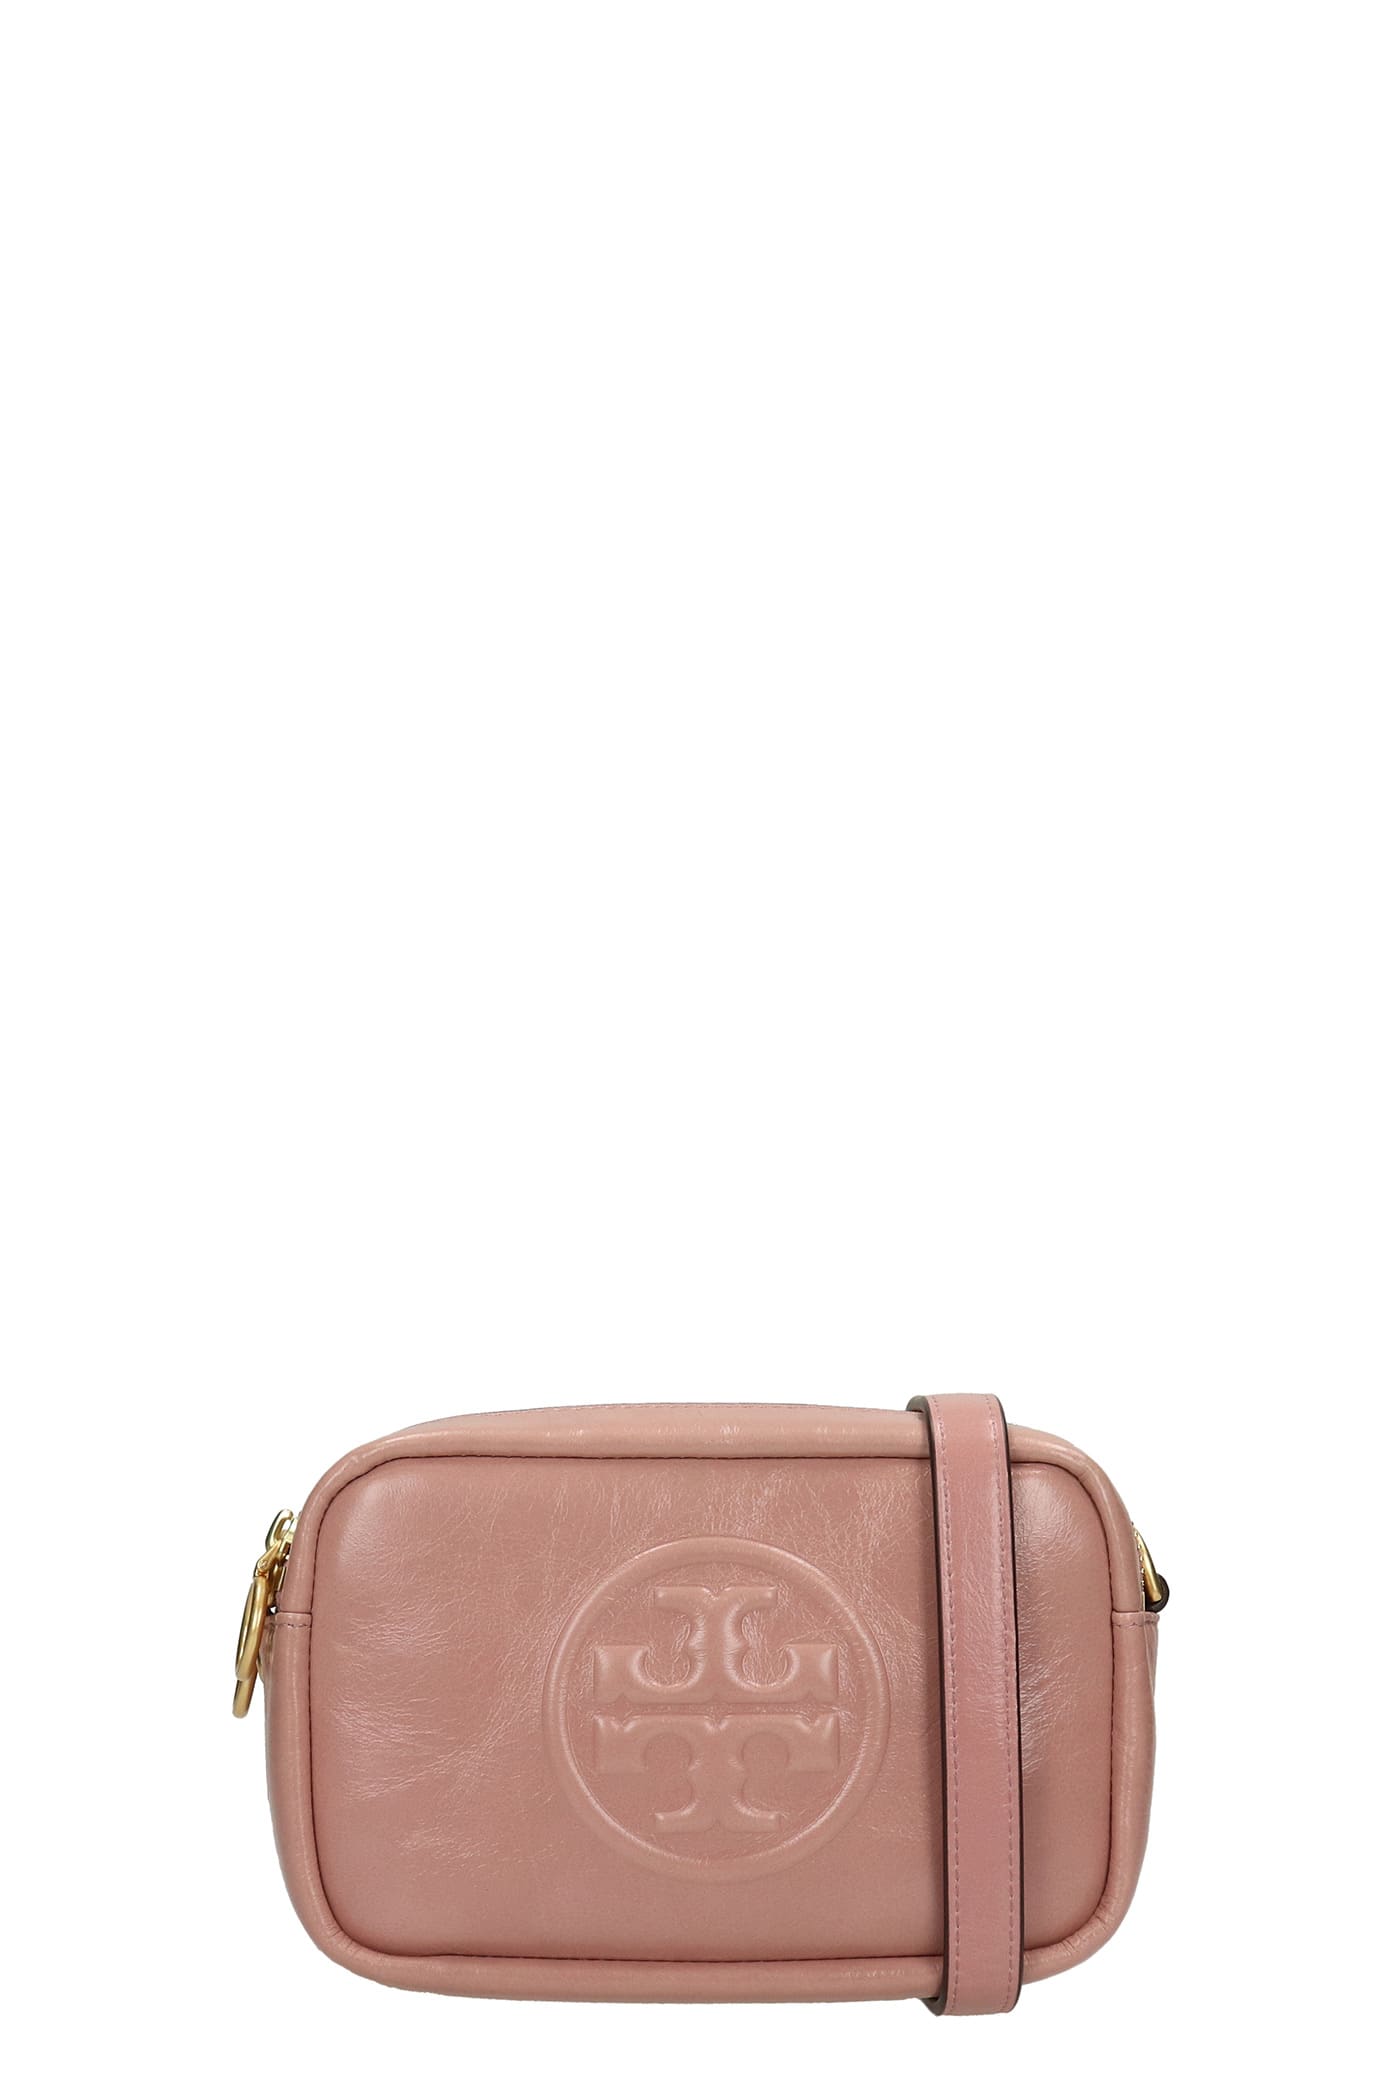 Tory Burch Perry Bomber Shoulder Bag In Rose-pink Leather